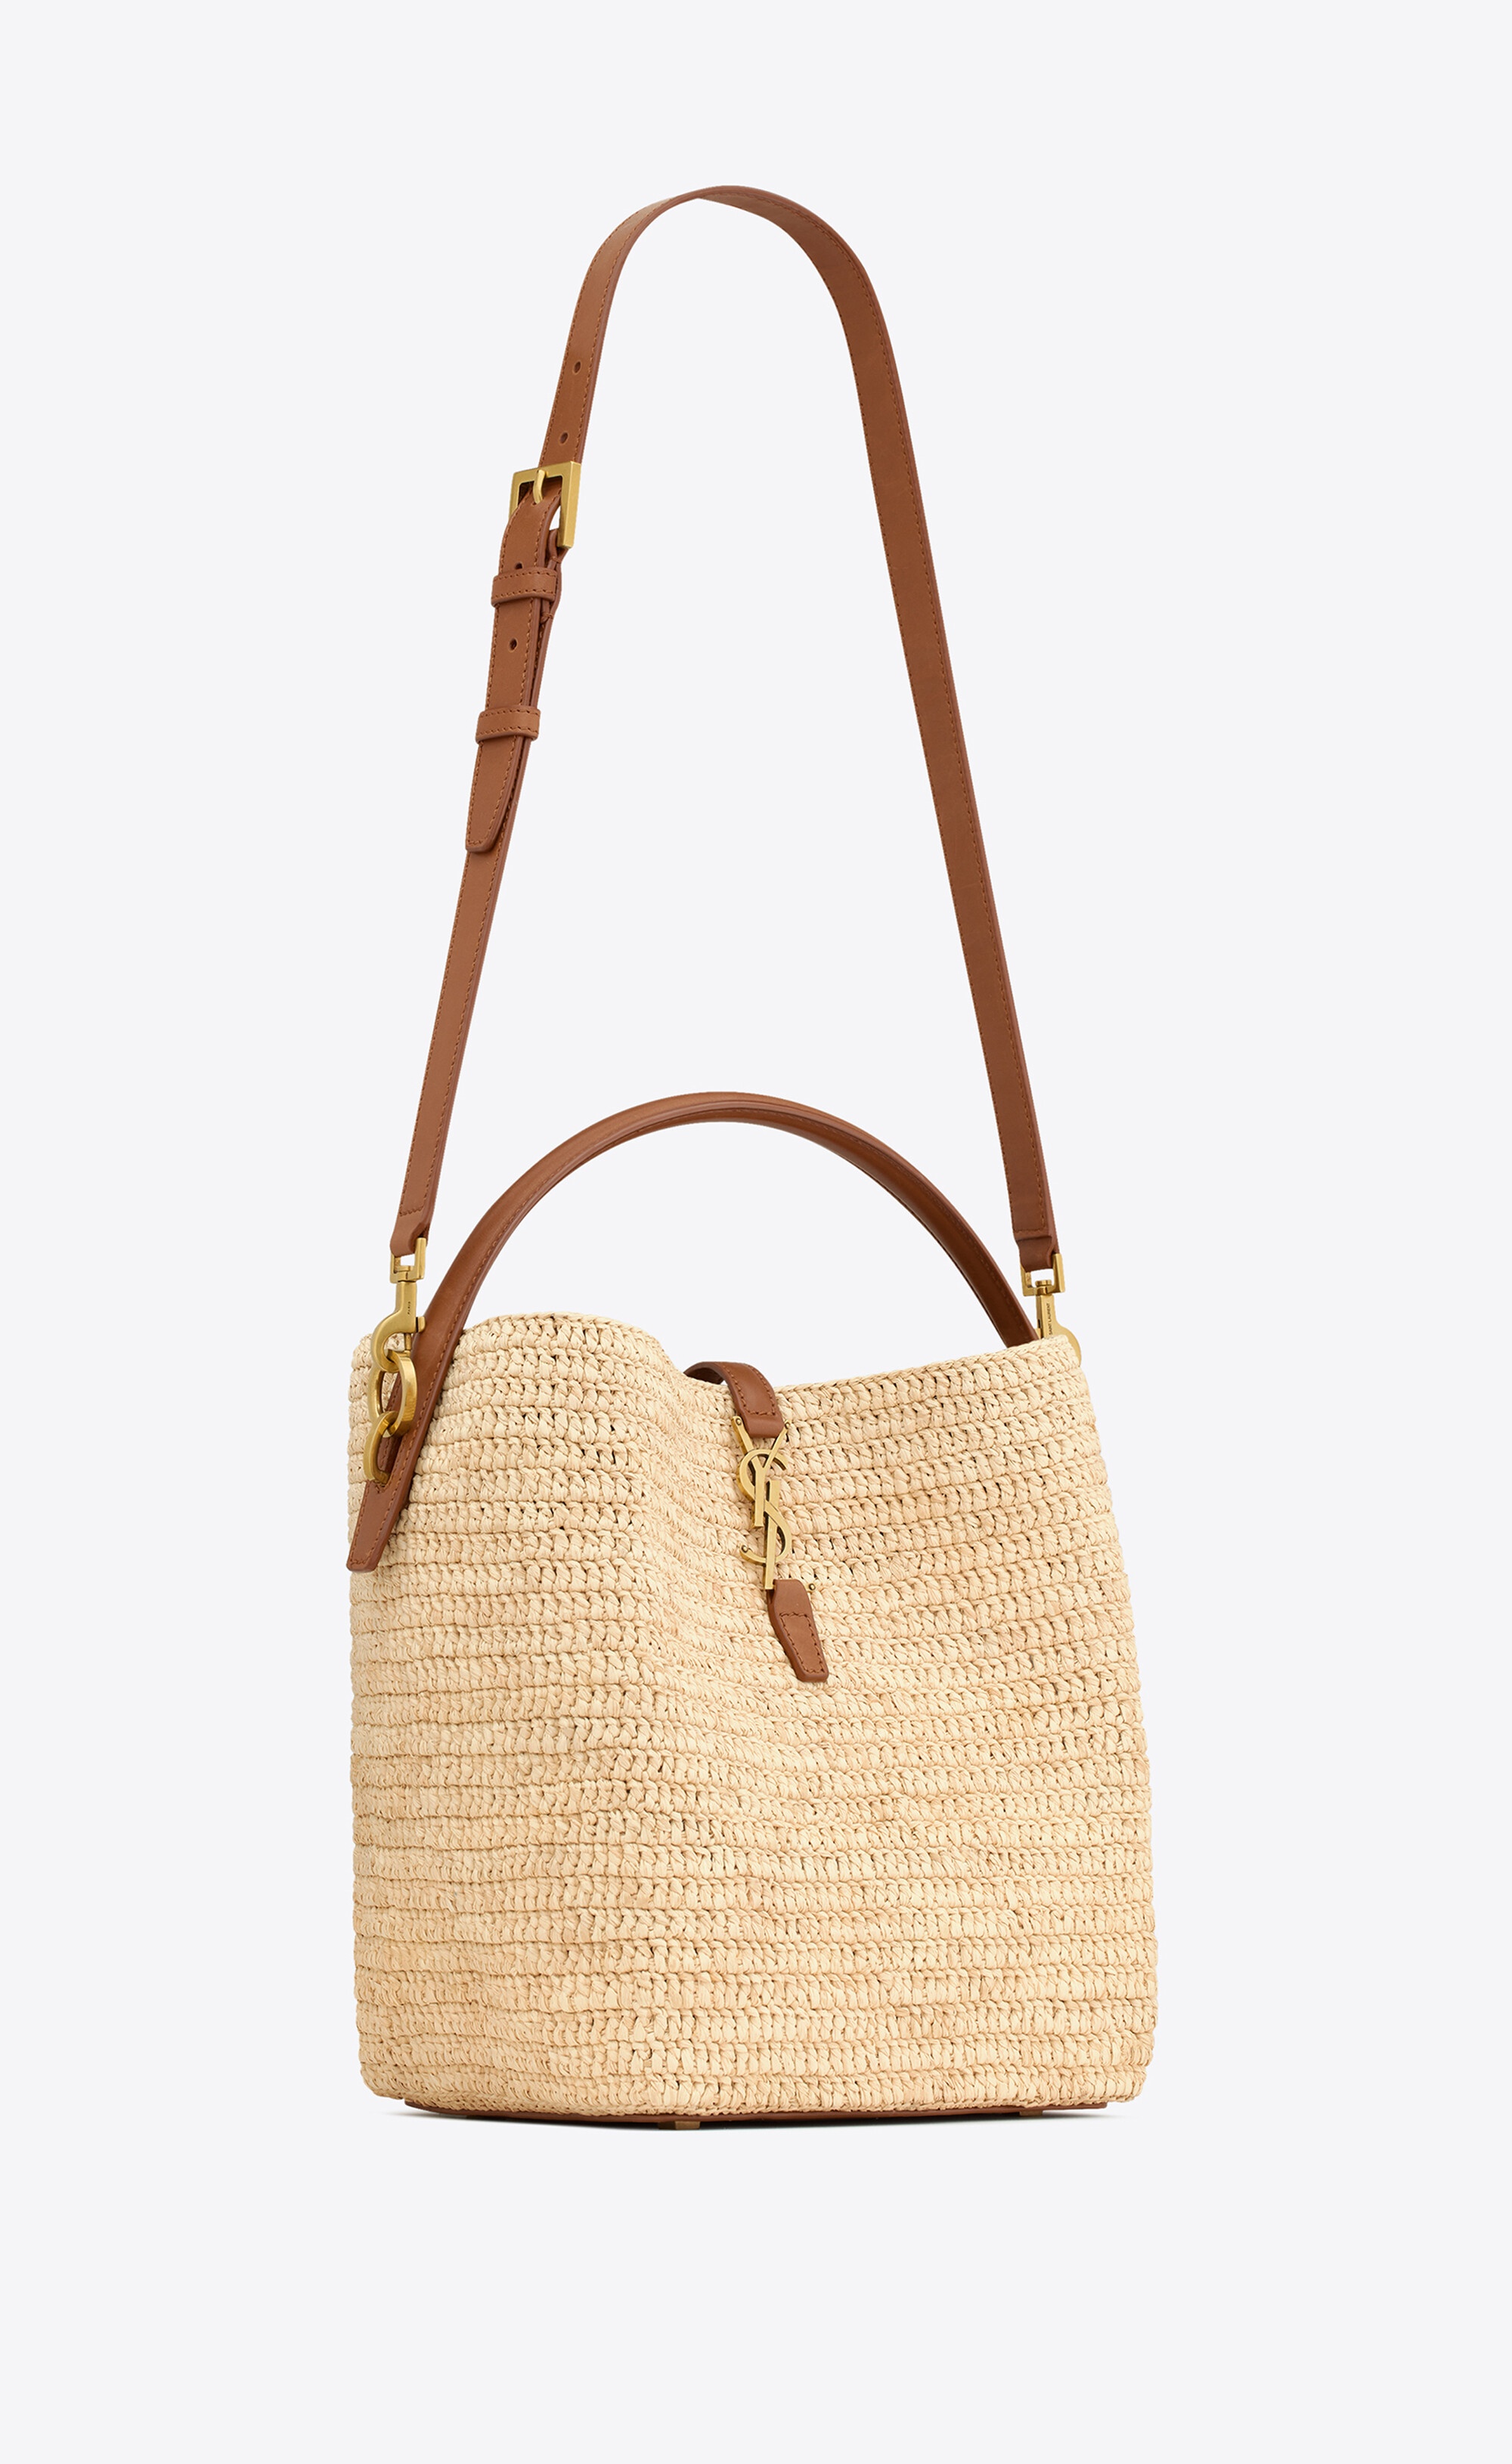 le 37 in woven raffia and vegetable-tanned leather - 7